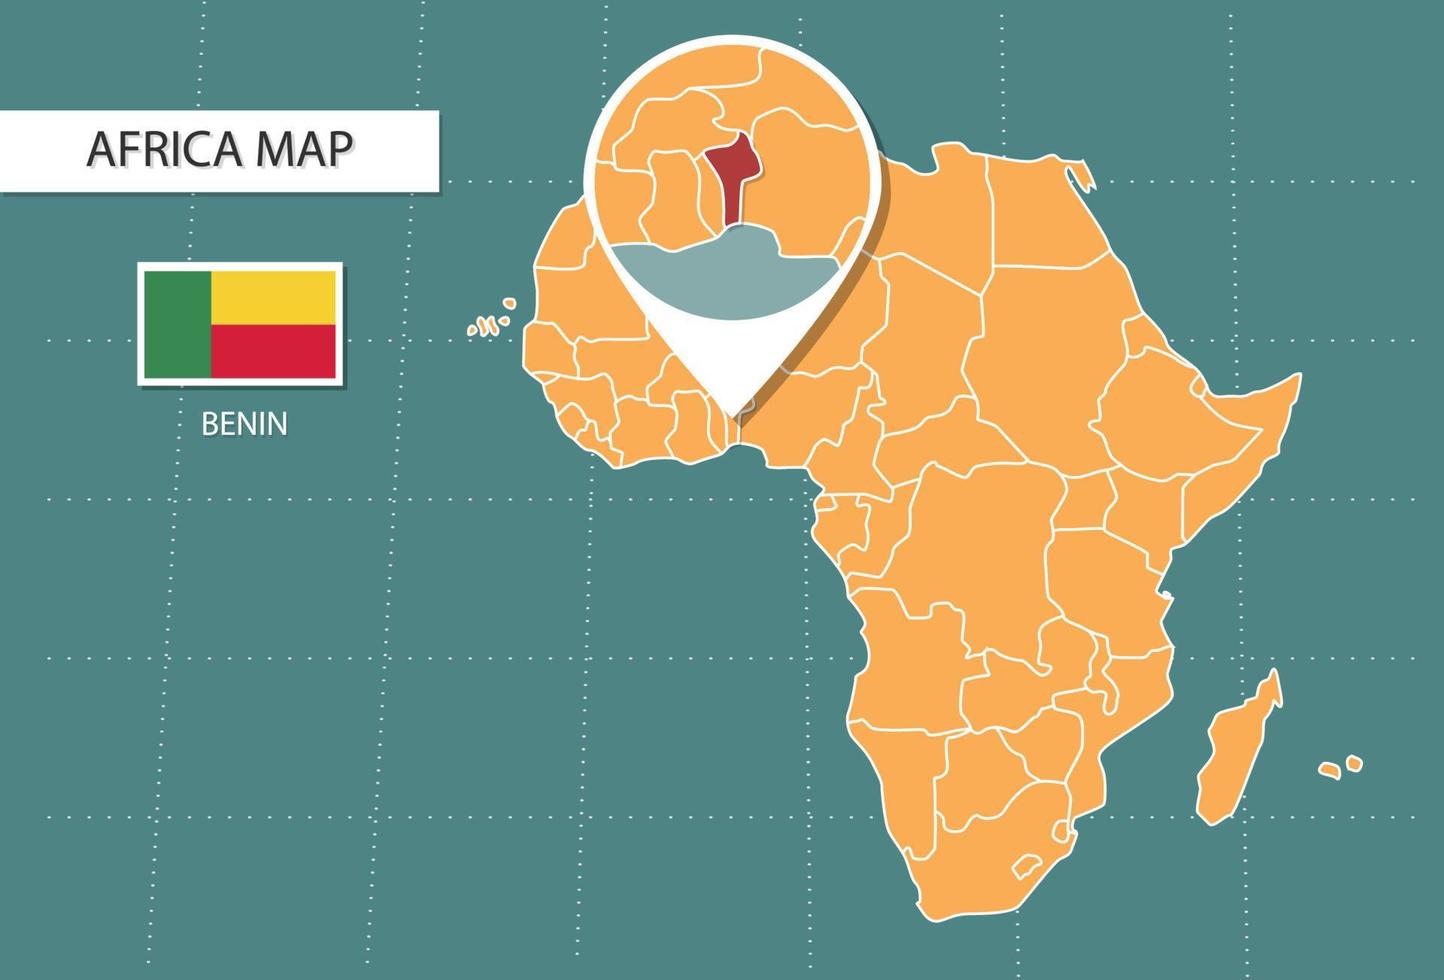 Benin map in Africa zoom version, icons showing Benin location and flags. vector